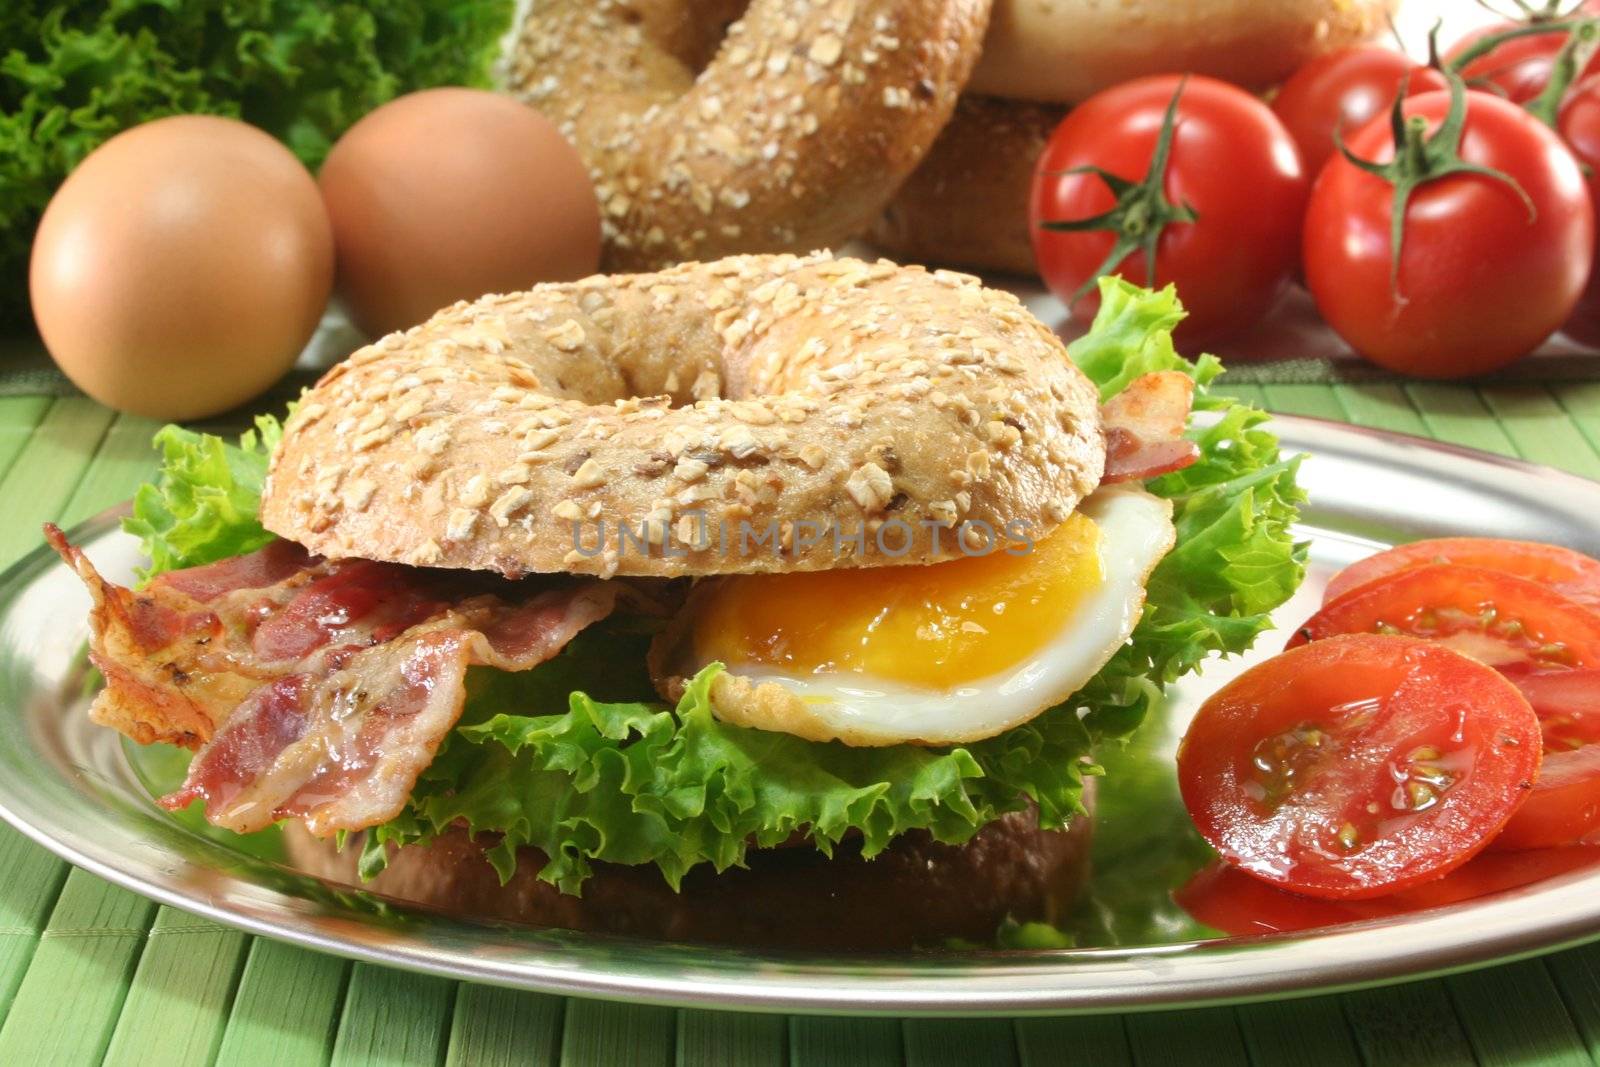 Rye bagel with salad, fried egg and bacon